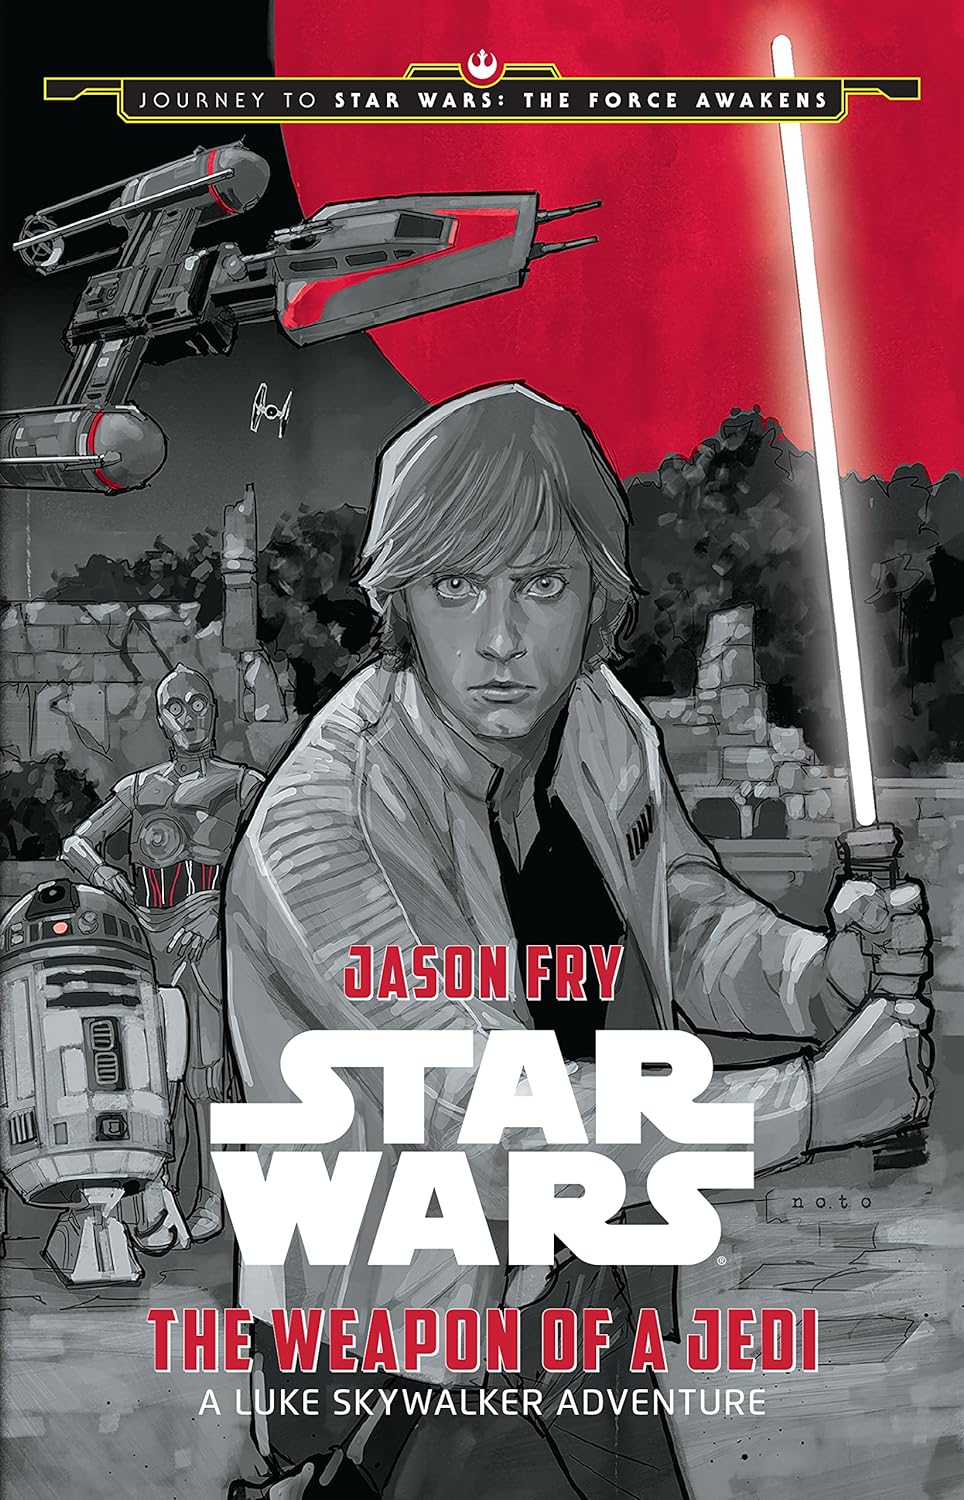 Journey to Star Wars: The Force Awakens: The Weapon of a Jedi: A Luke Skywalker Adventure (hardcover) Jason Fry